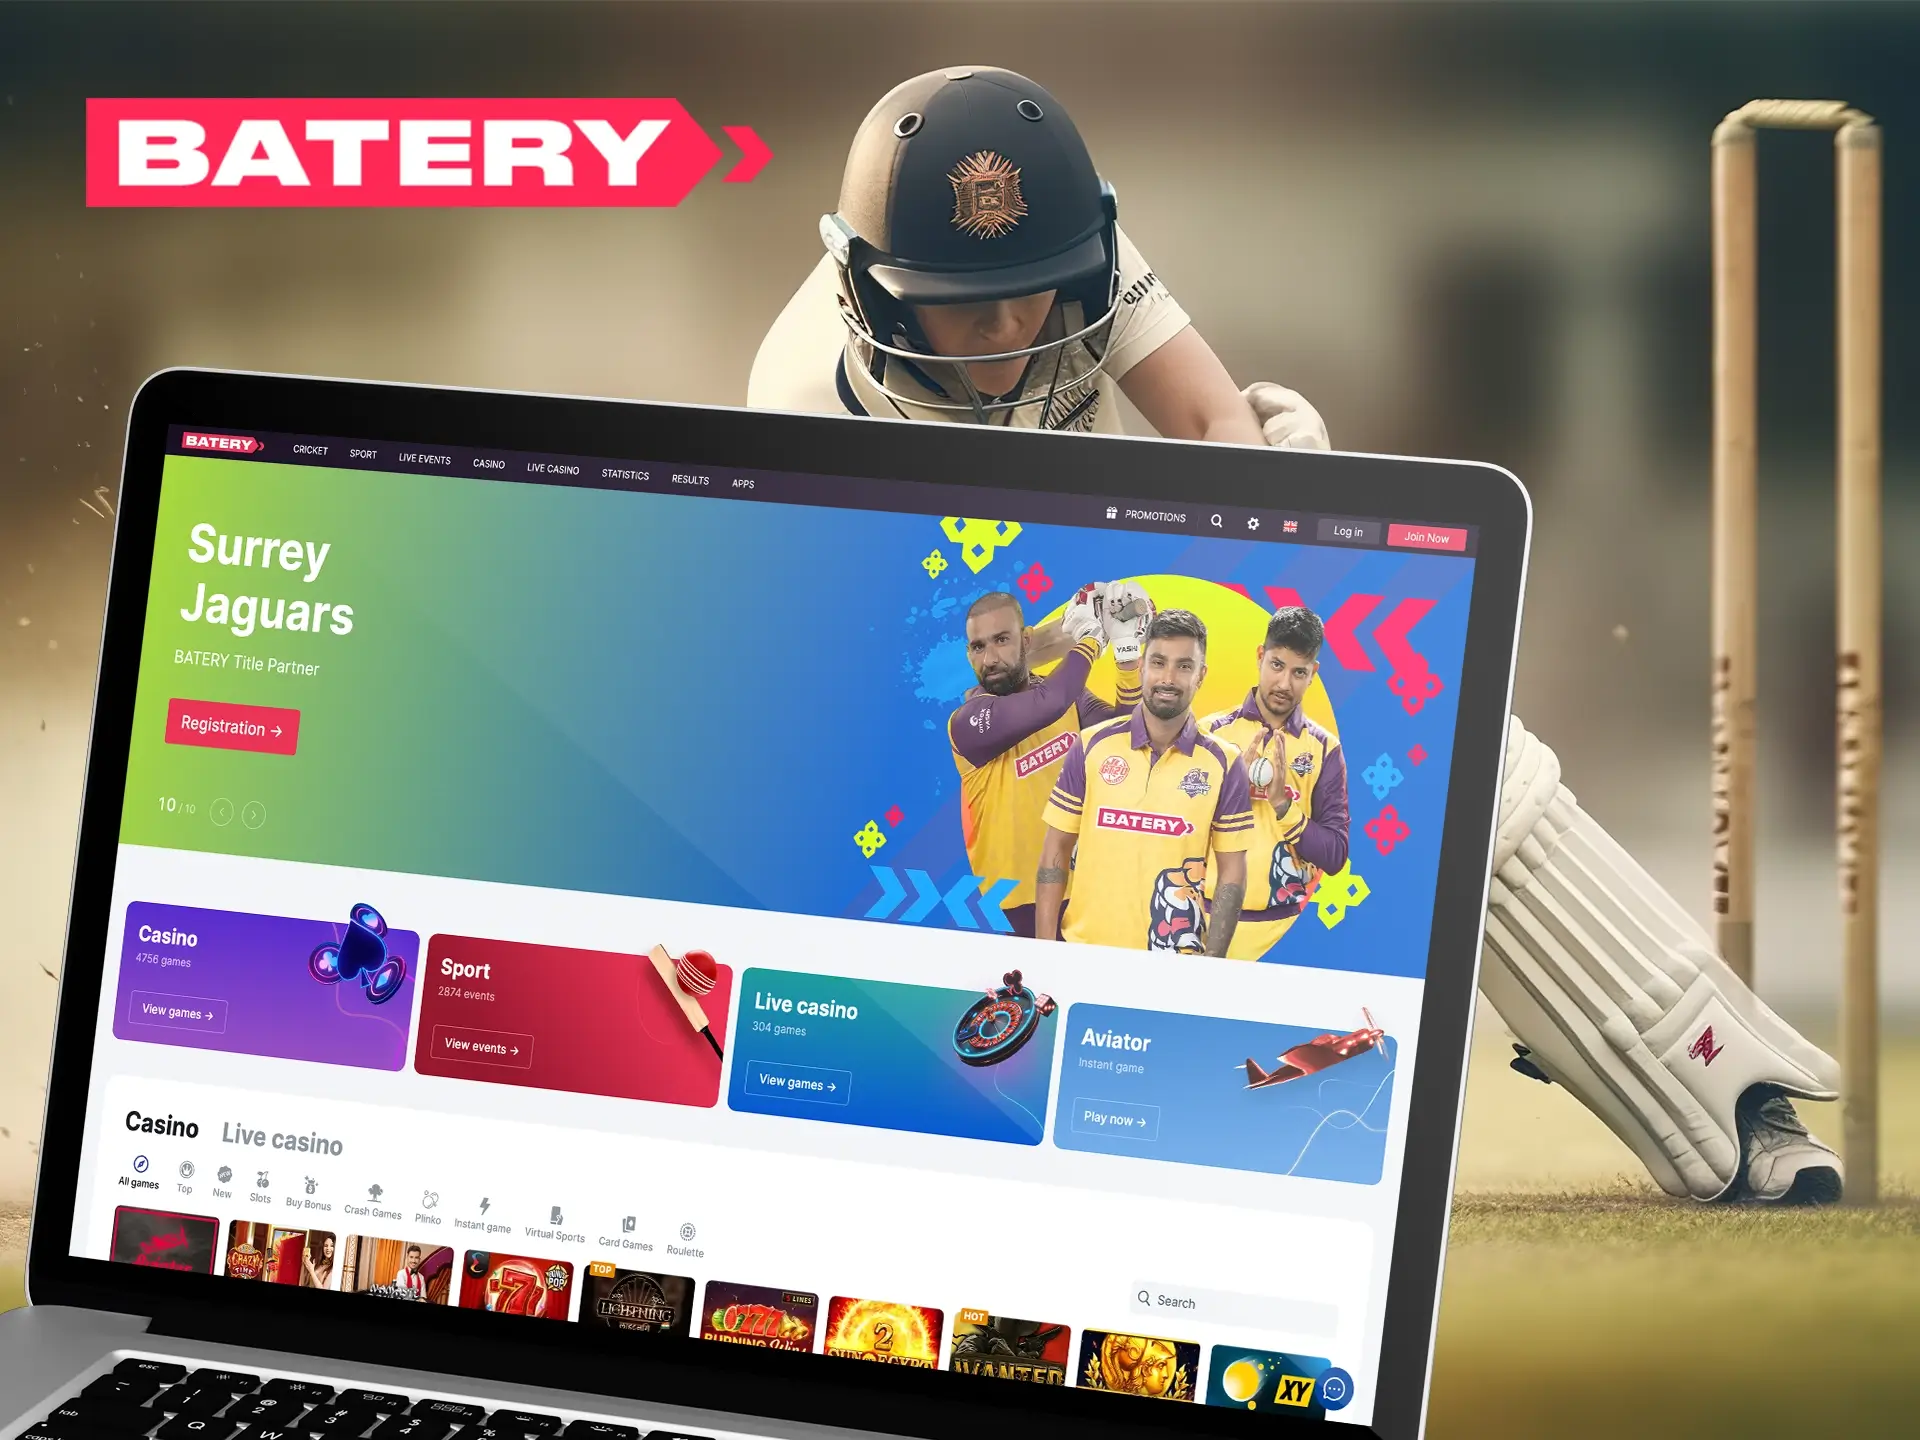 The official Batery website offers its customers an excellent design and a variety of settings to optimise it for their tastes.